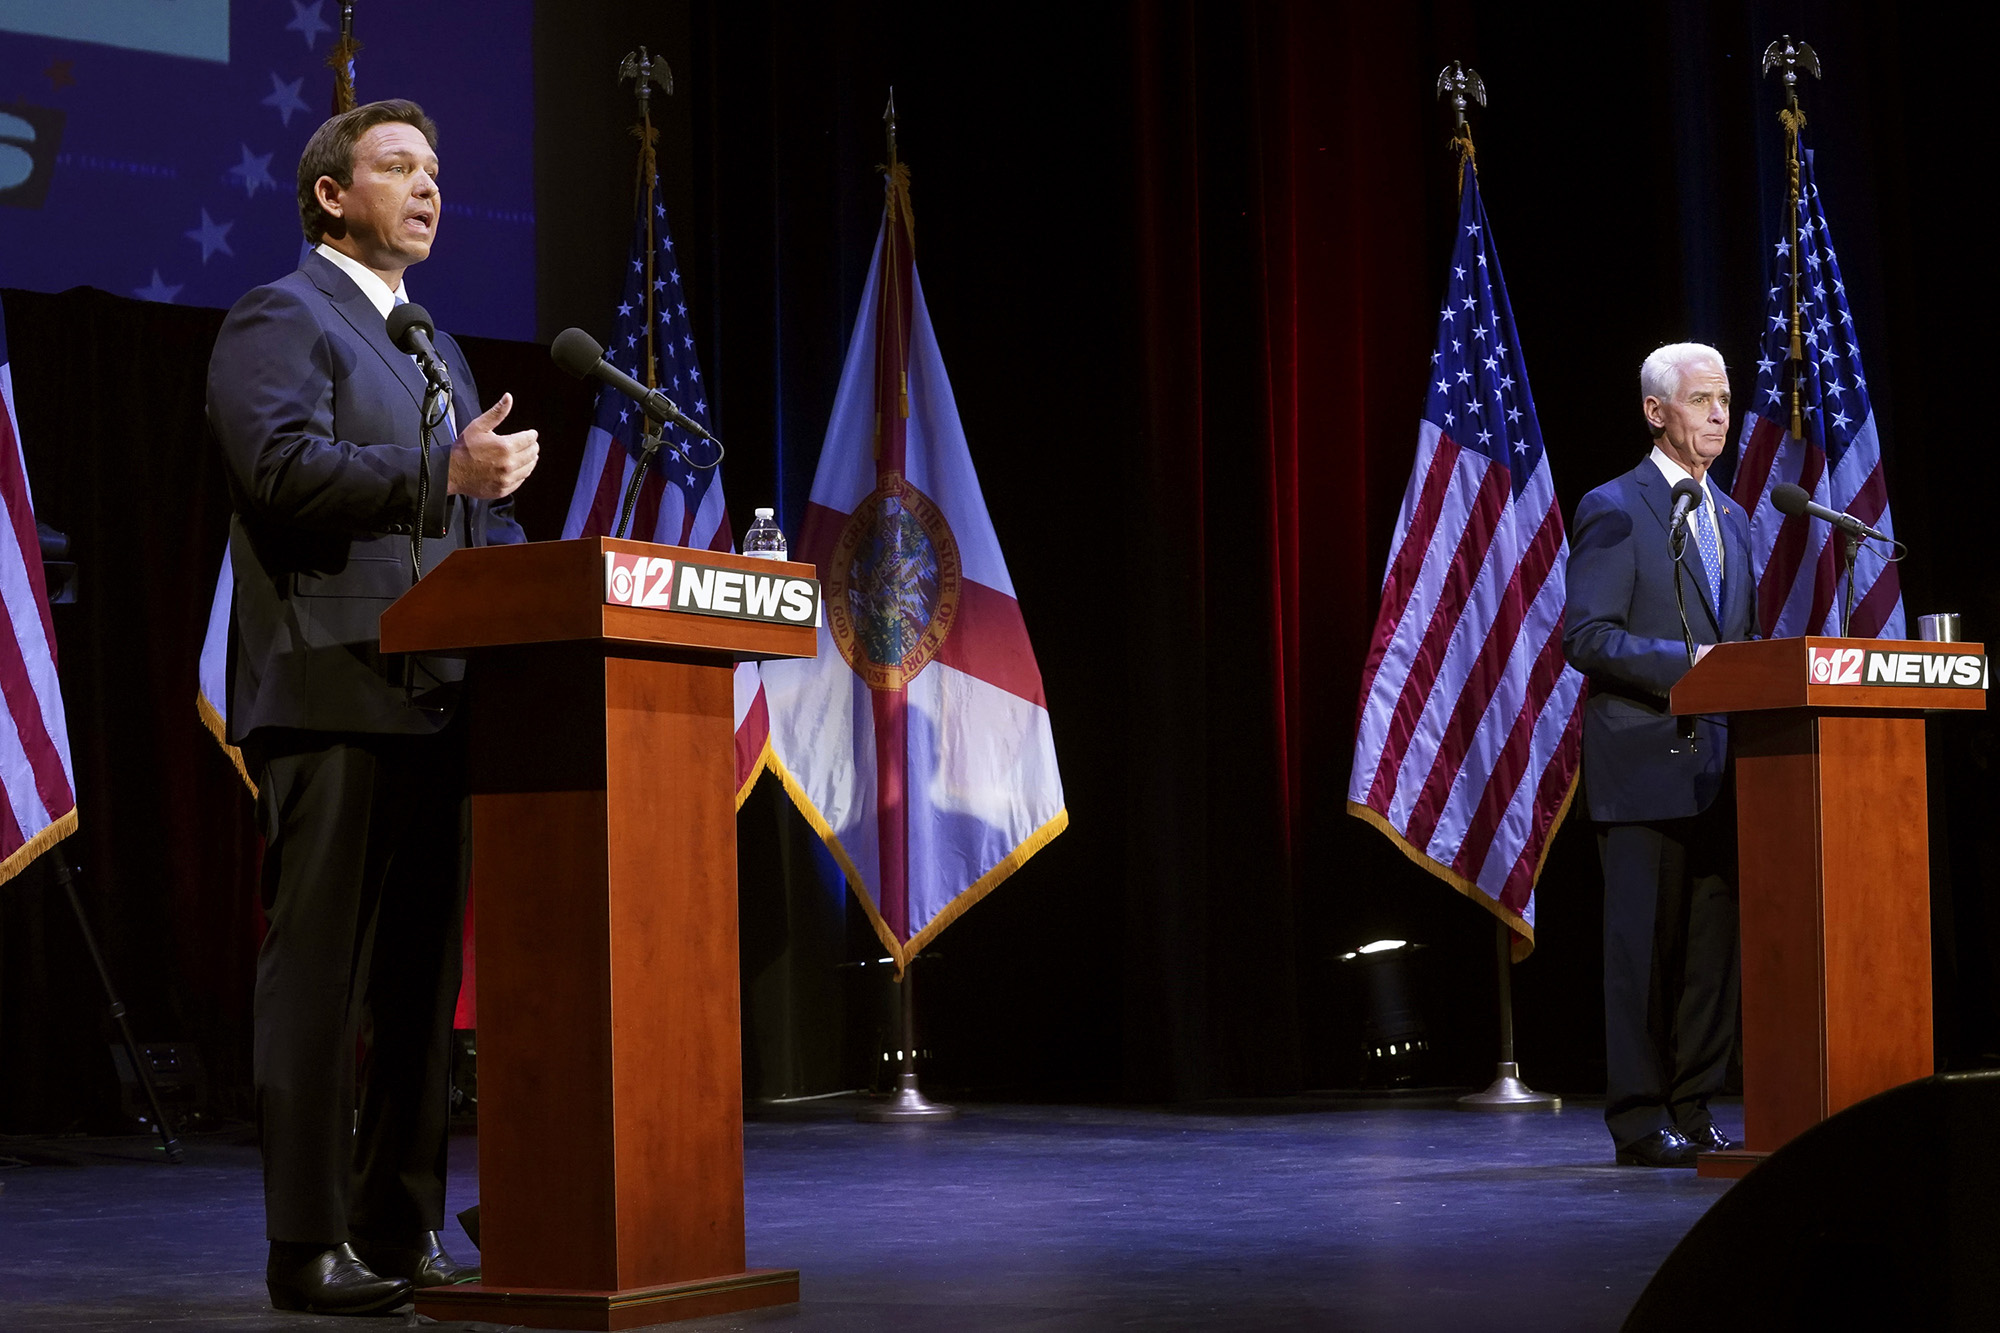 PHOTO: Florida's Republican Gov. Ron DeSantis speaks during a debate with his Democratic opponent Charlie Crist in Fort Pierce, Fla., Oct. 24, 2022.